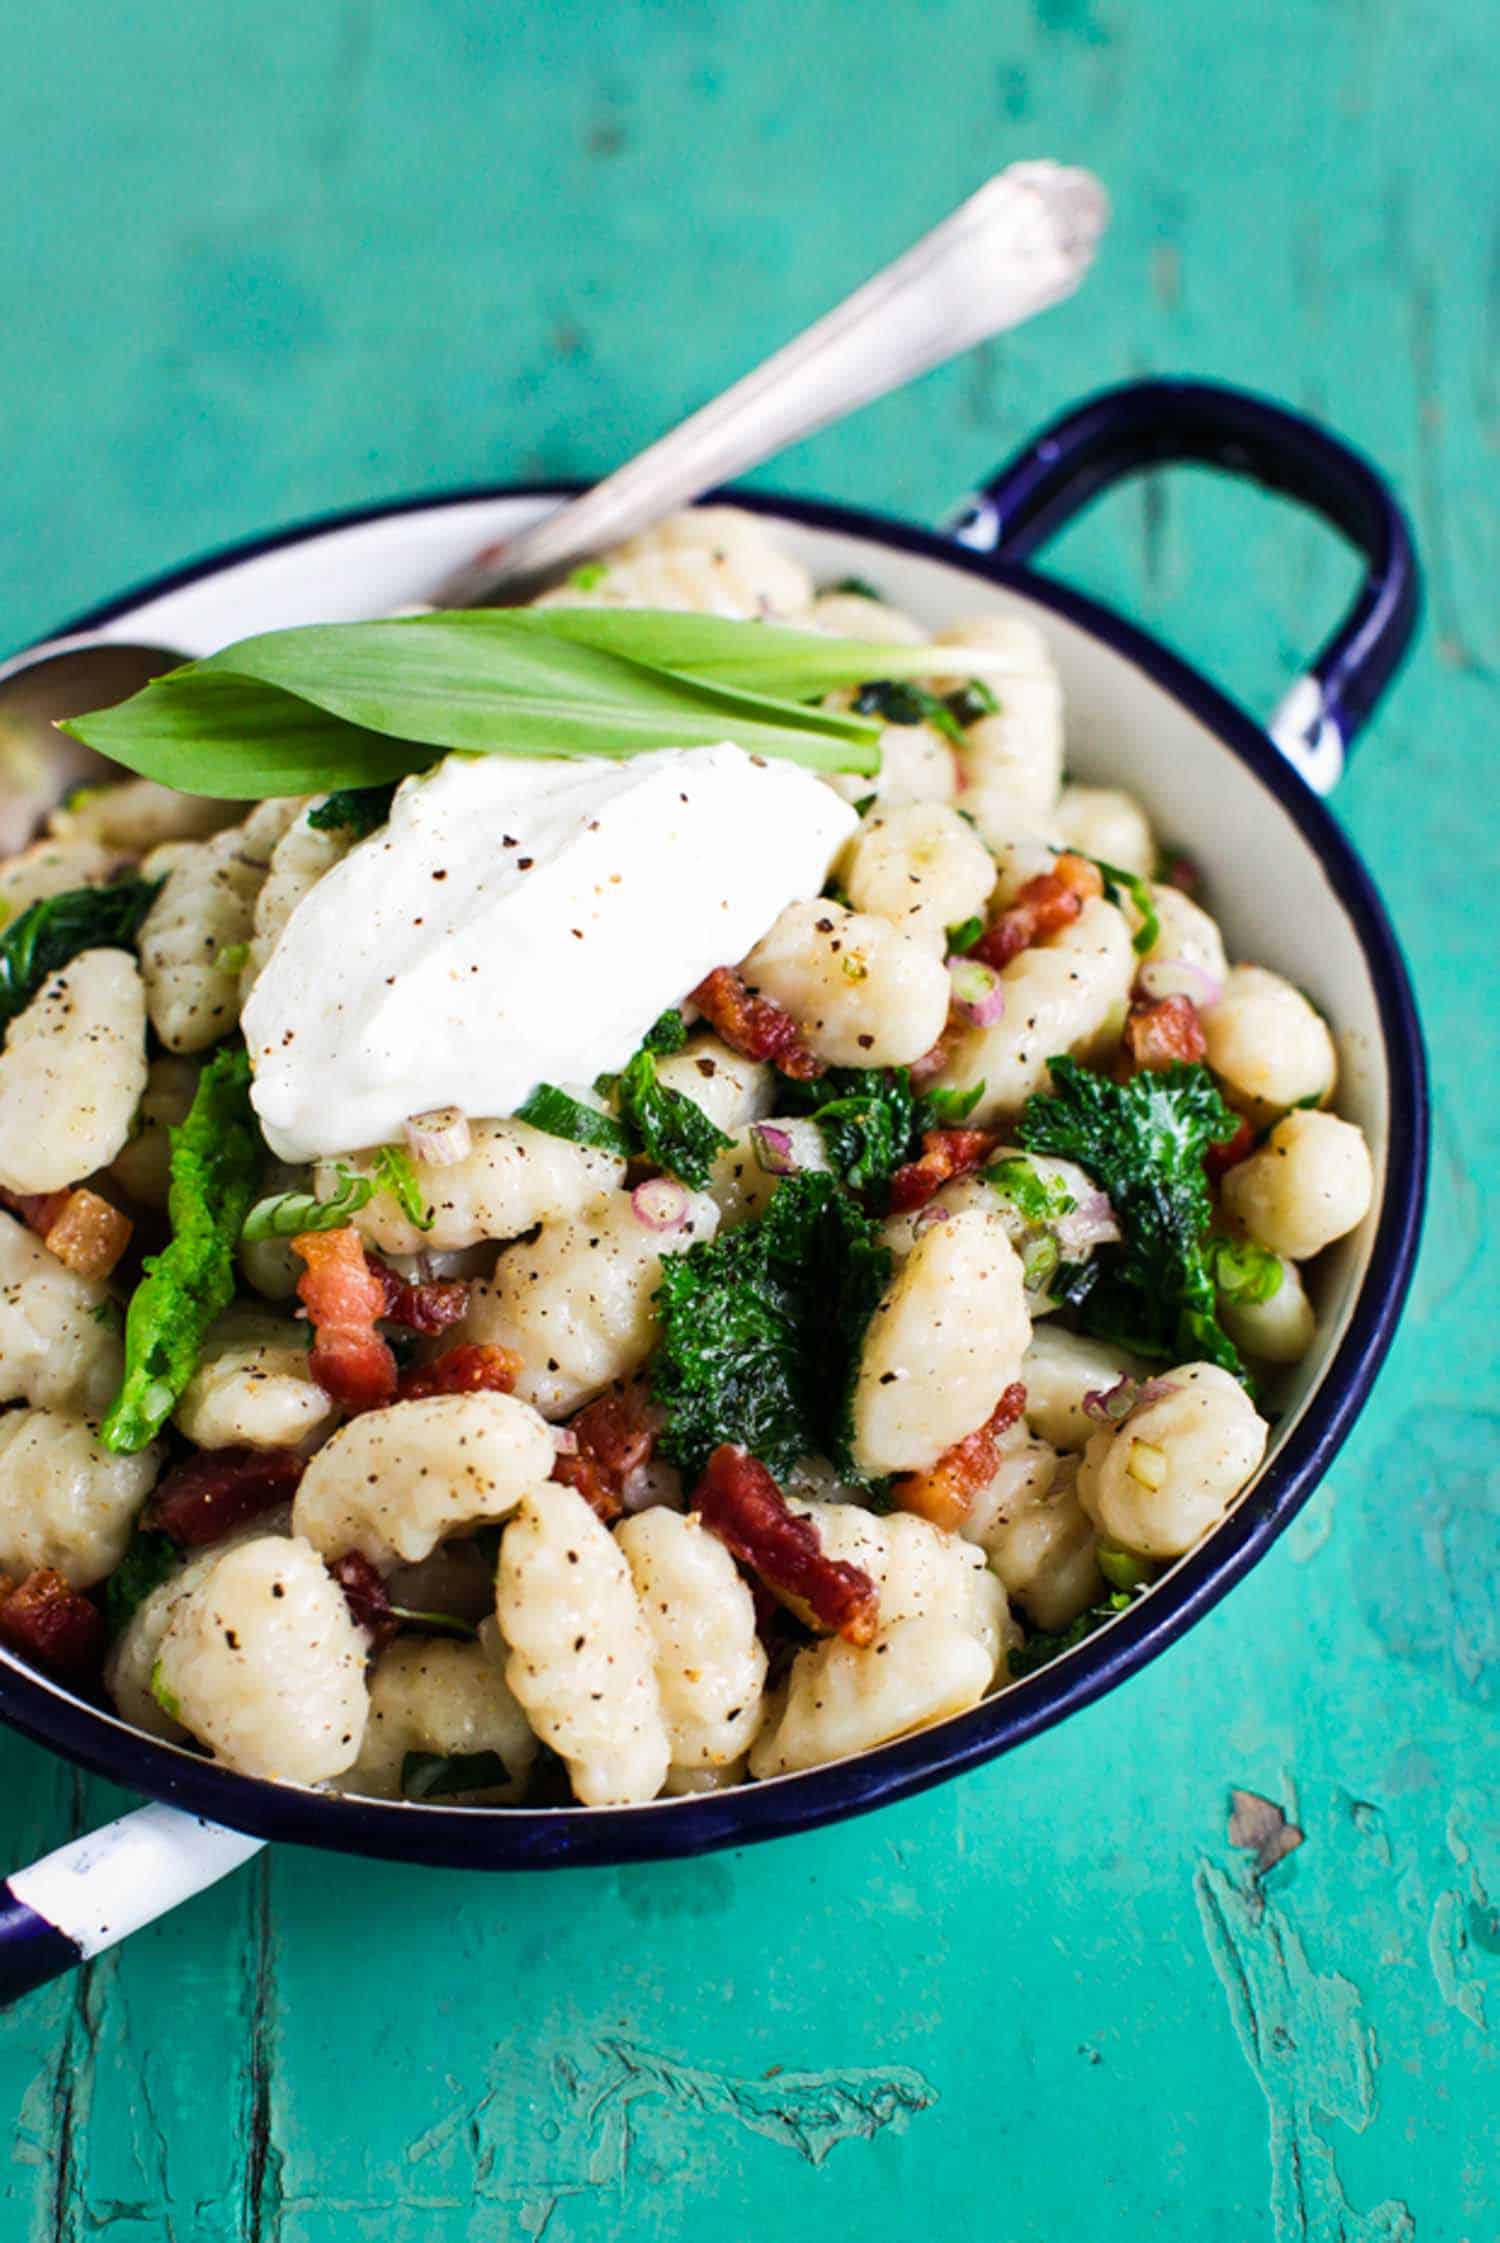 Ramp recipe gnocchi with kale in a white pot on a green background